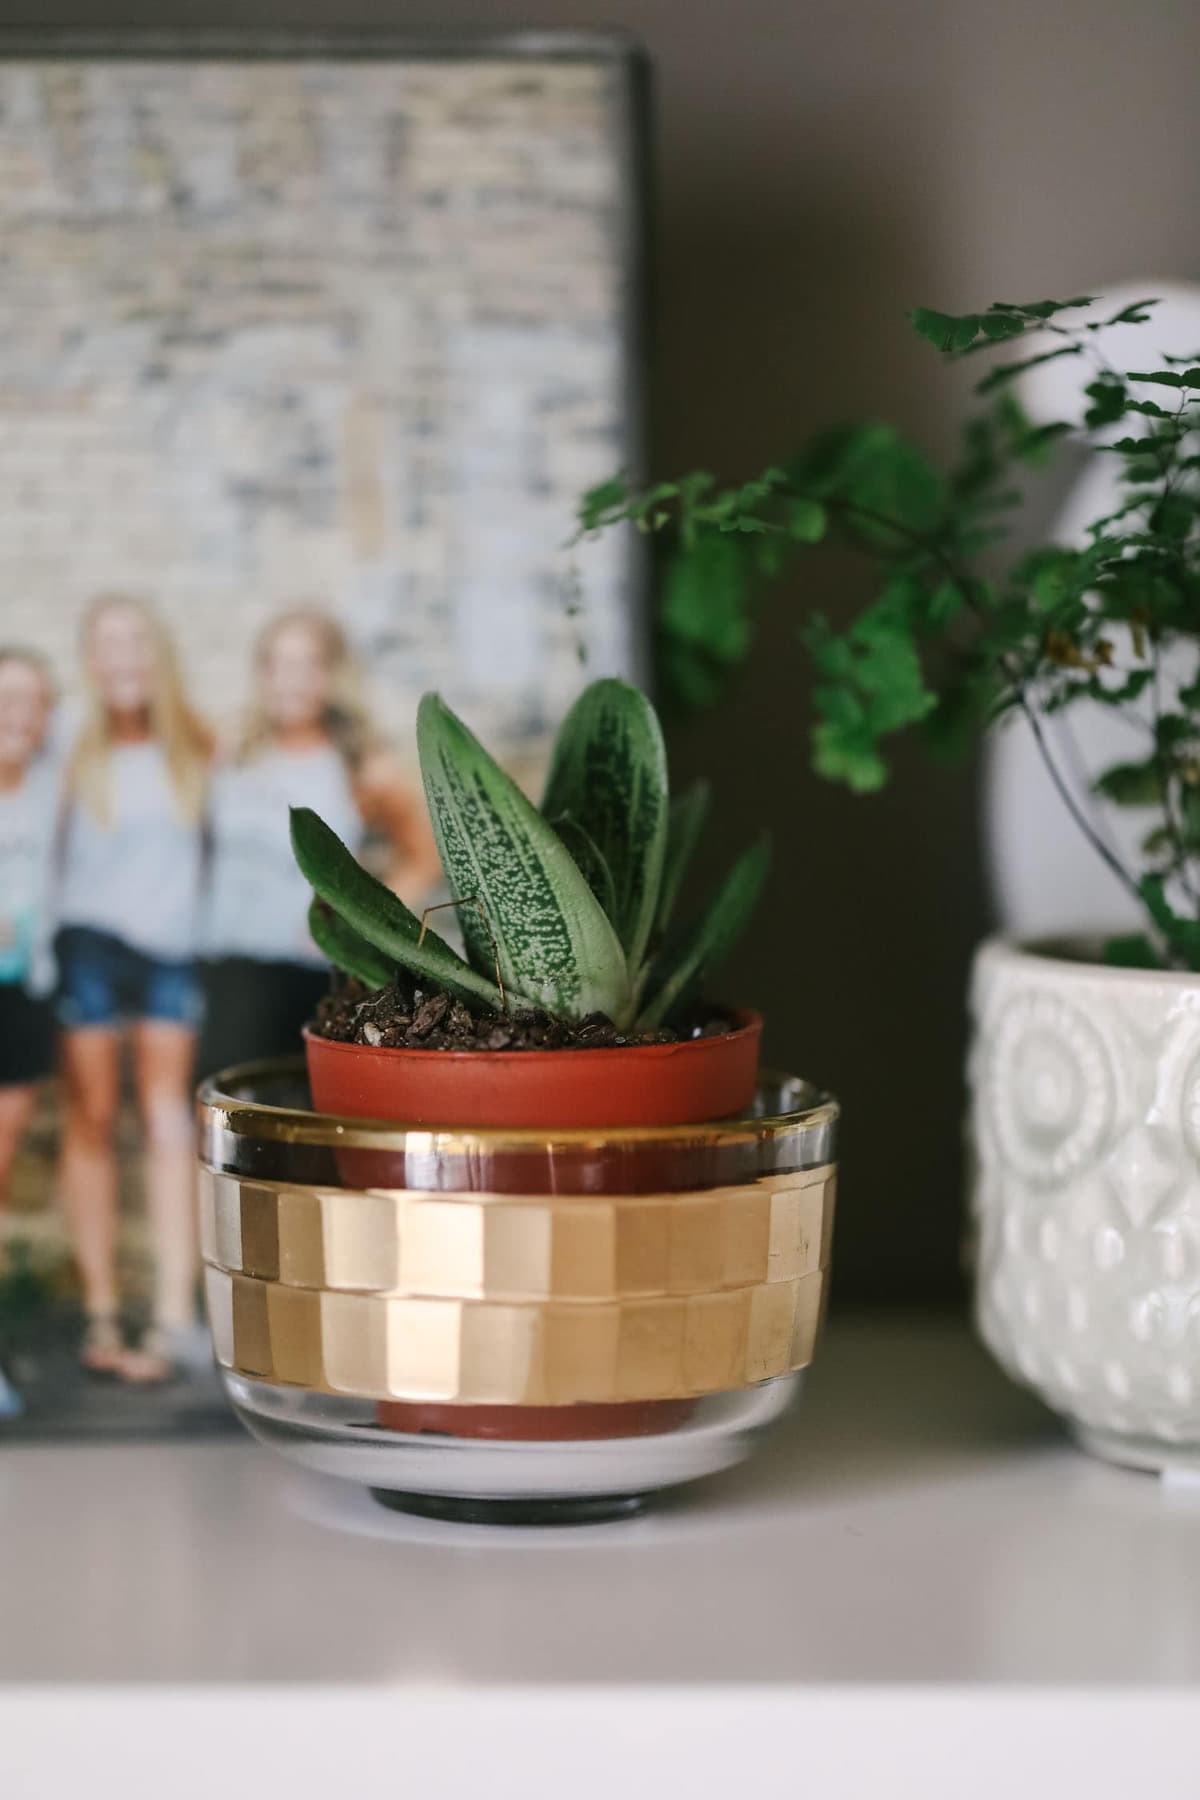 Plants make the world go round (literally) and I love them so much. Read all about the reasons why I love plants! In this post I also share which plants I have and how to take care of each one.